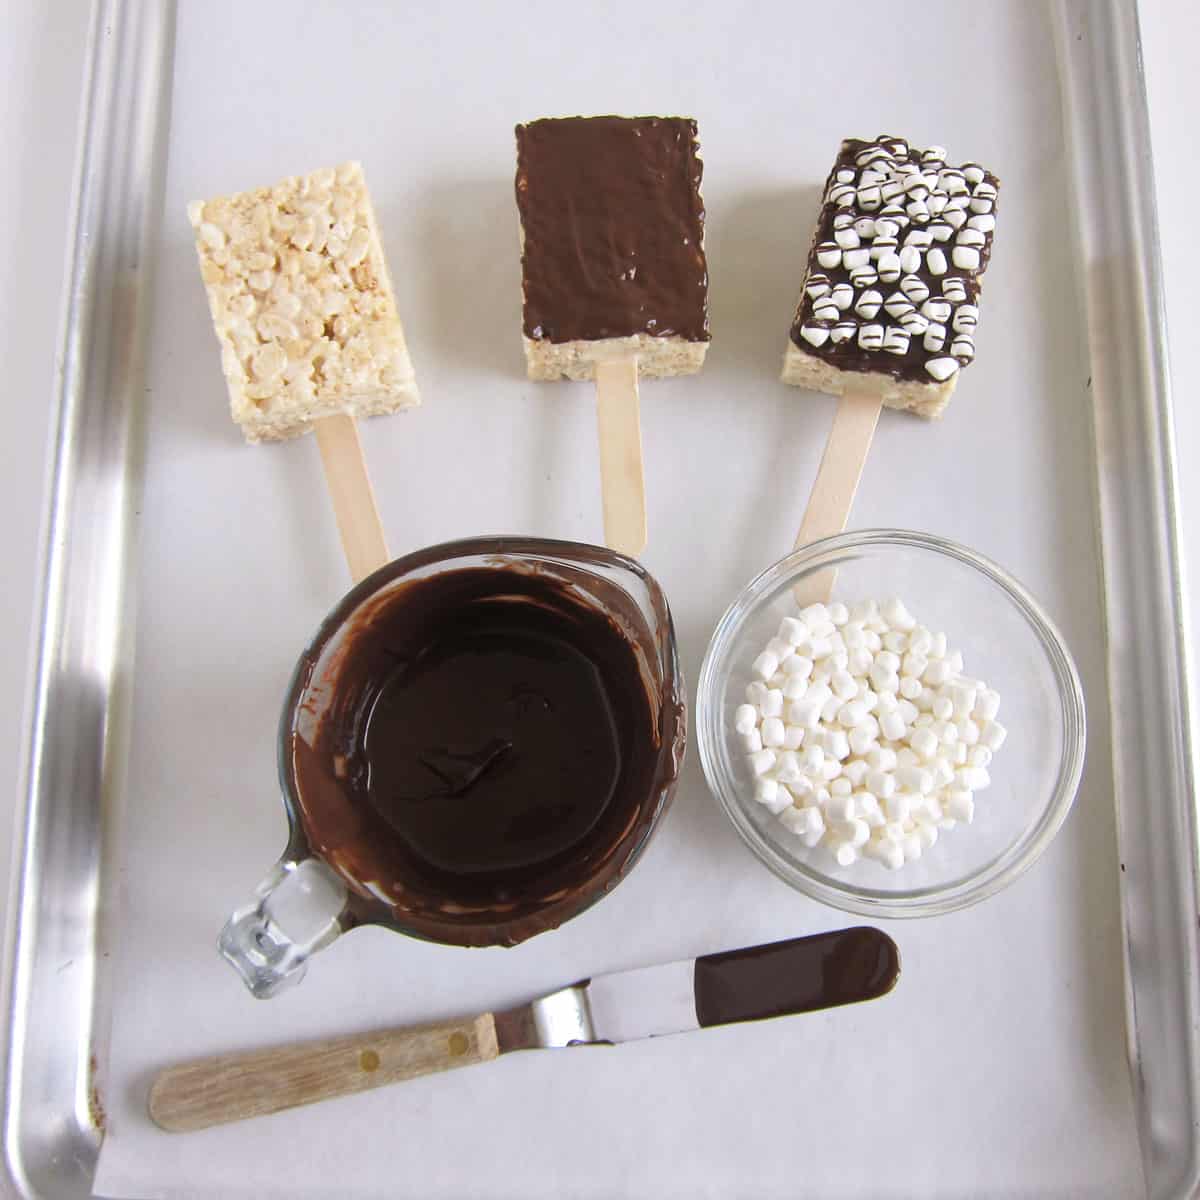 Rice Krispie Treat pops plain, covered in chocolate, and topped with dehydrated marshmallows next to bowls of melted chocolate and tiny marshmallows.